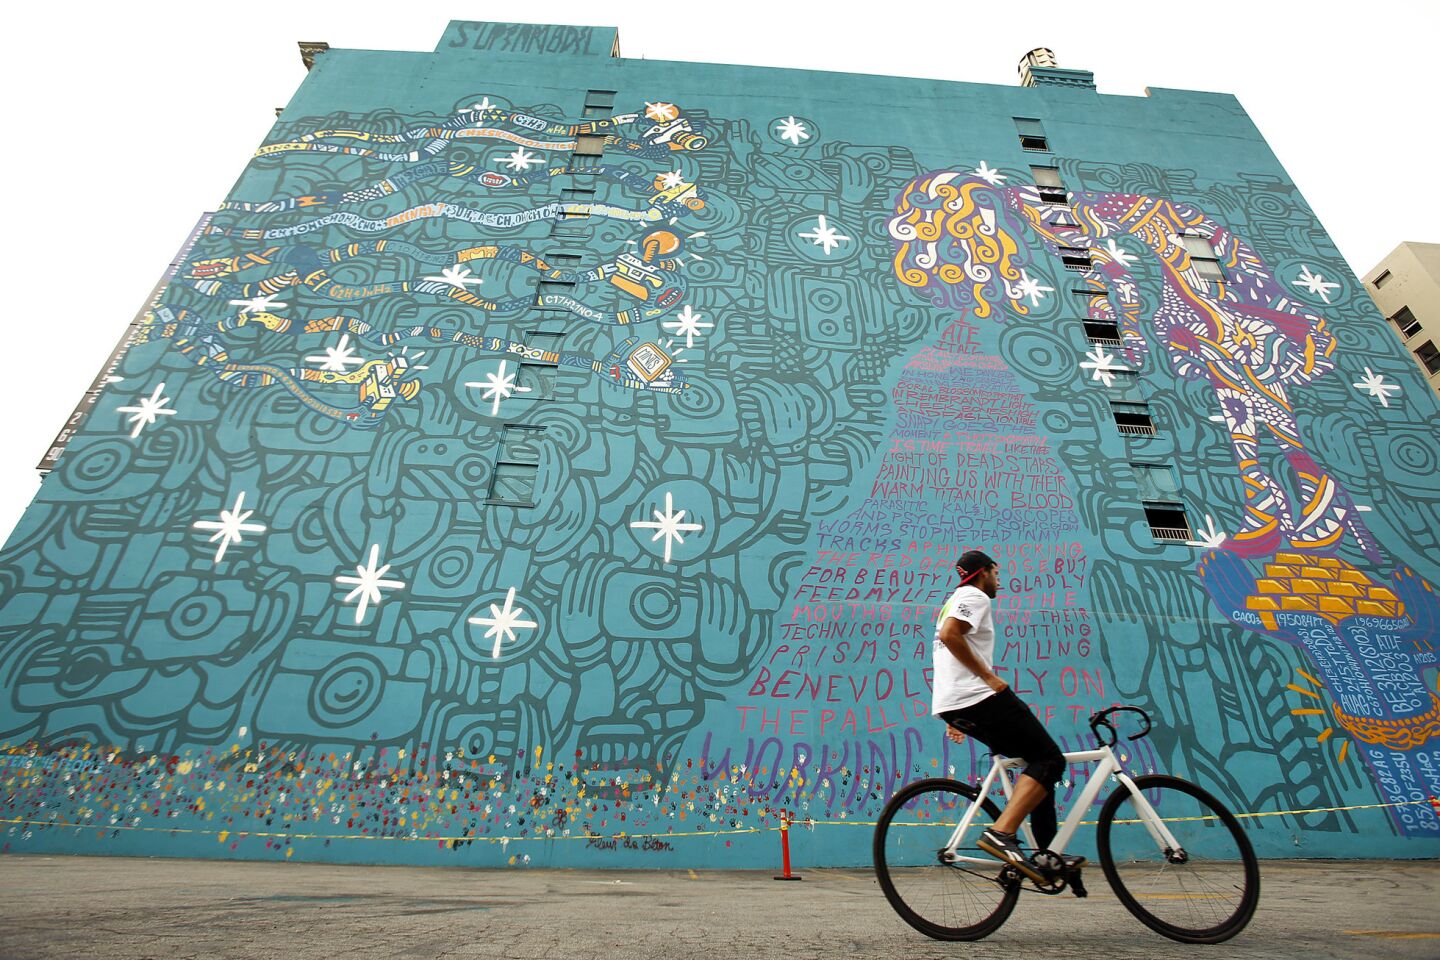 Arts and culture in pictures by The Times | Foster the People mural